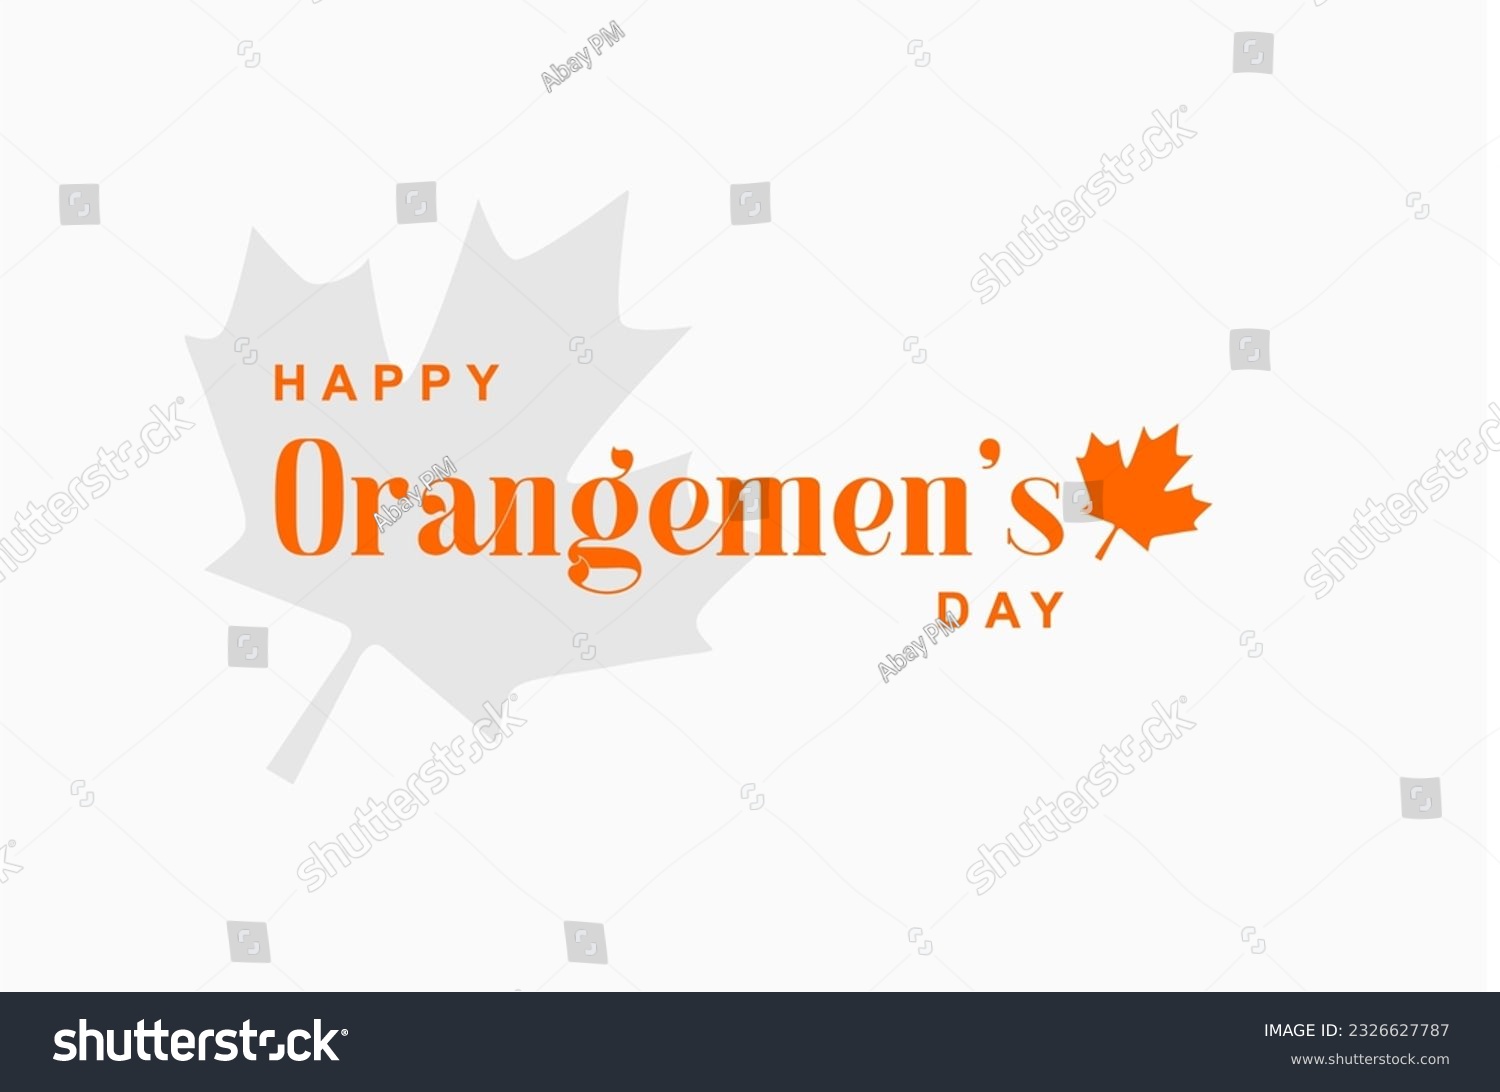 SVG of orangemen's day canada, july 12, background template Holiday concept svg